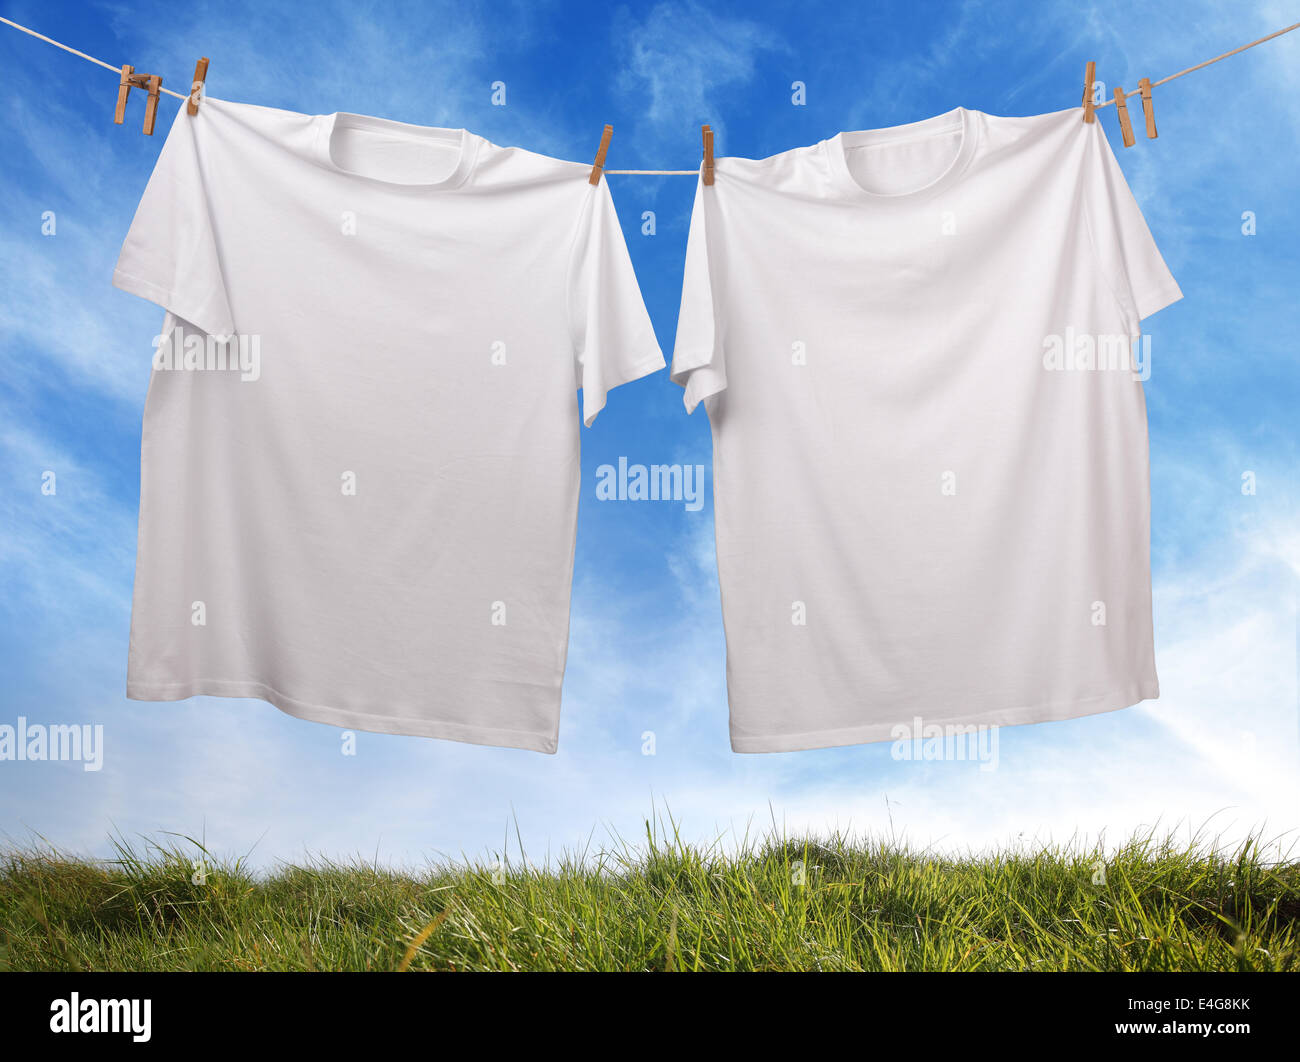 Blank white t-shirt hanging on clothesline Banque D'Images